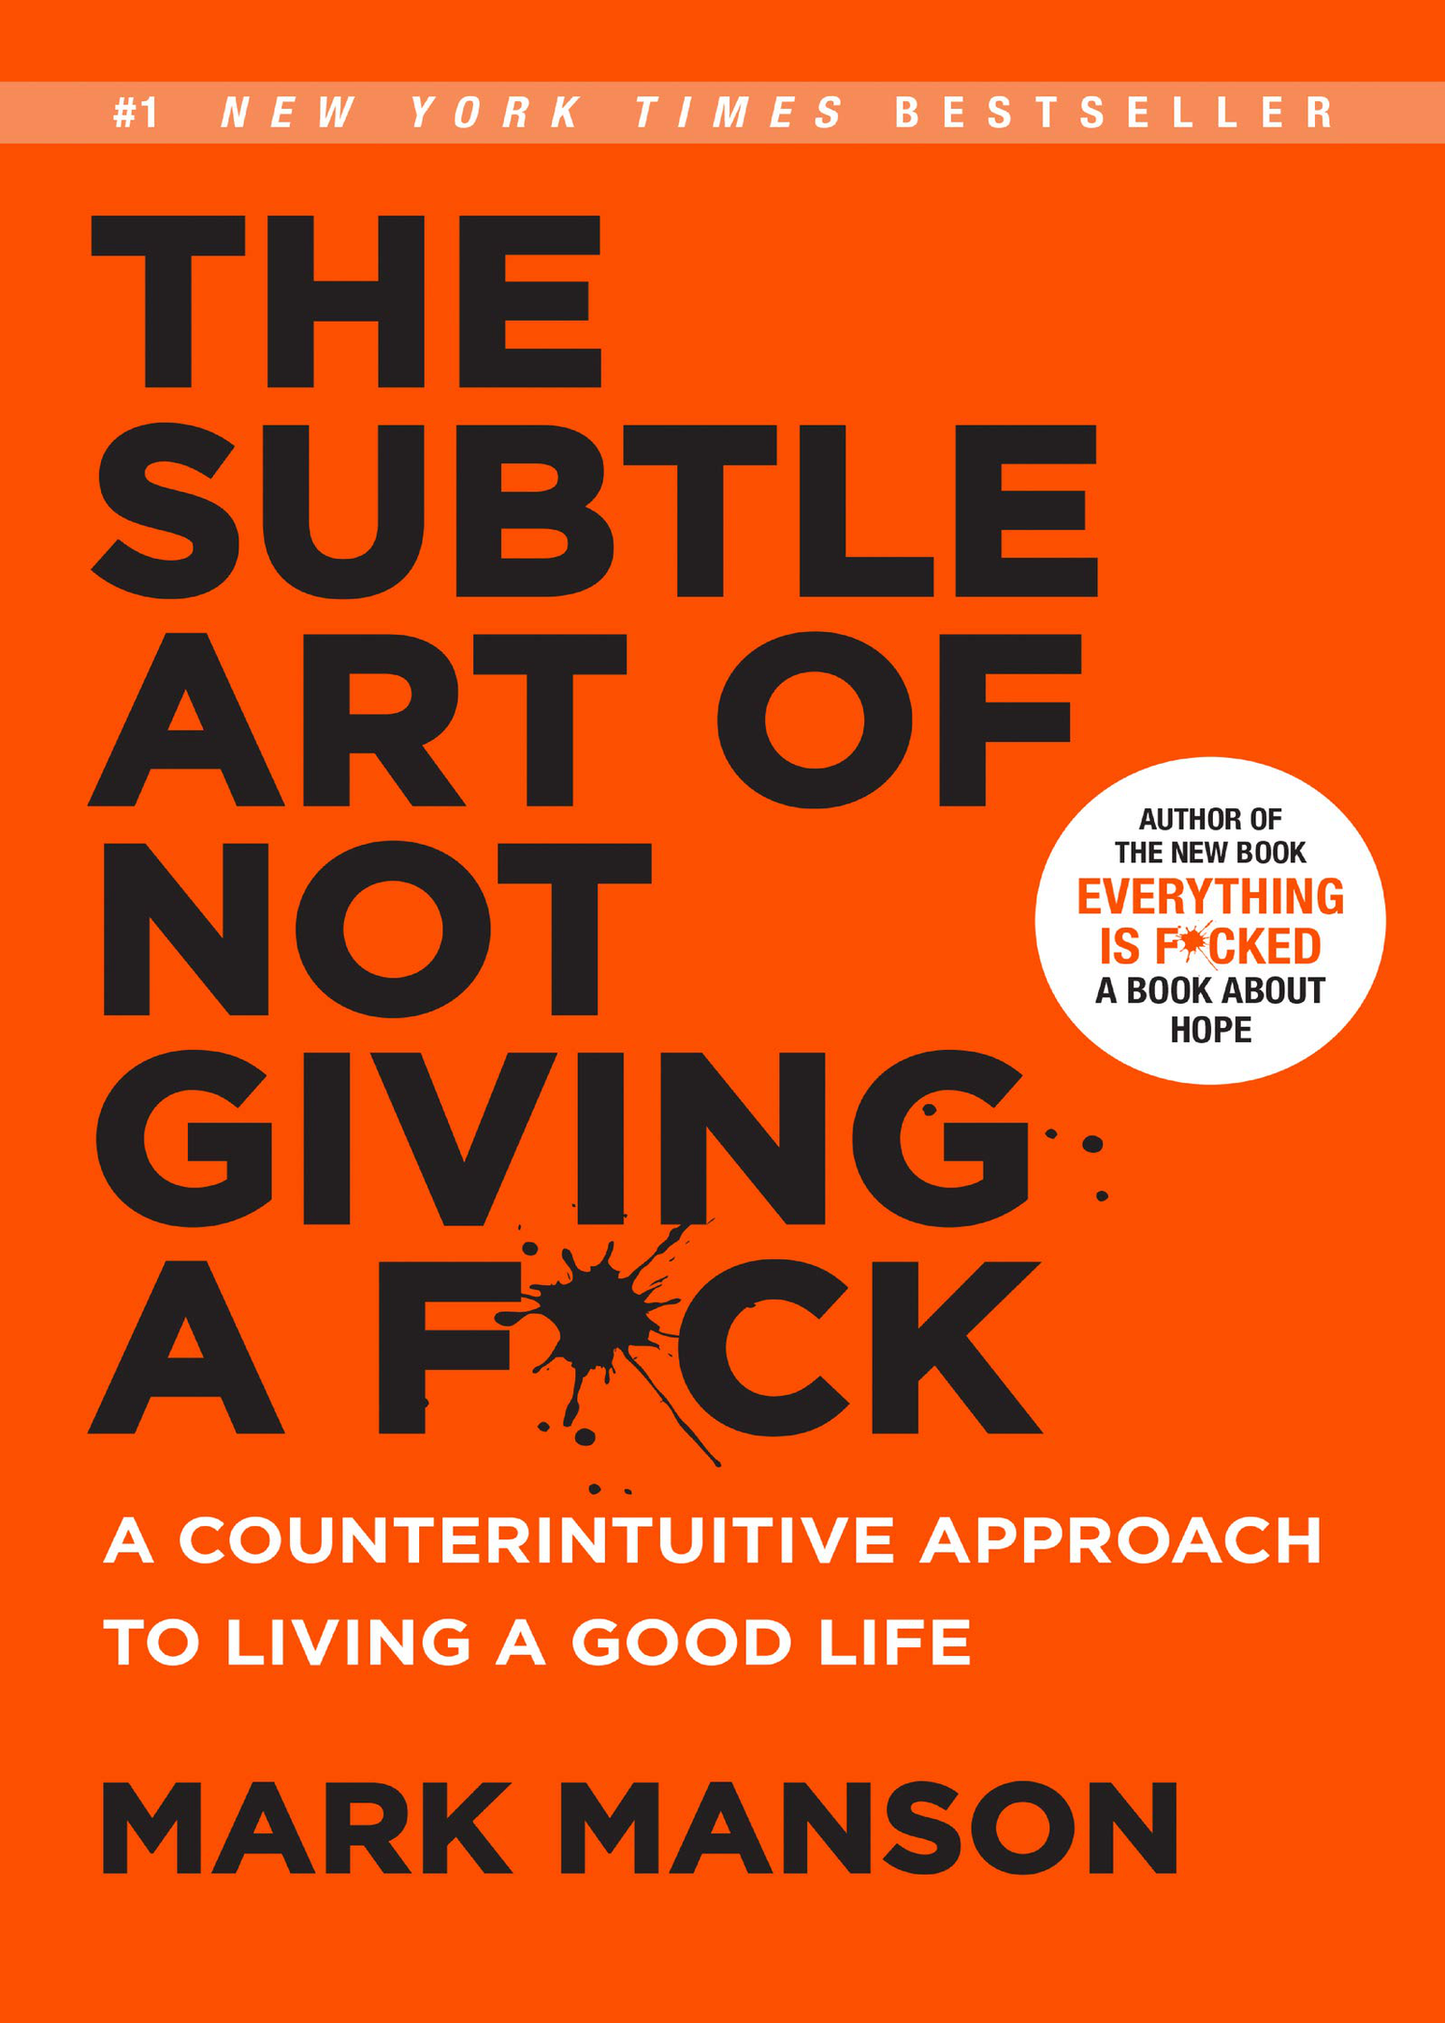 The Subtle Art of Not Giving a F*Ck: a Counterintuitive Approach to Living a Good Life (Mark Manson Collection Book 1)